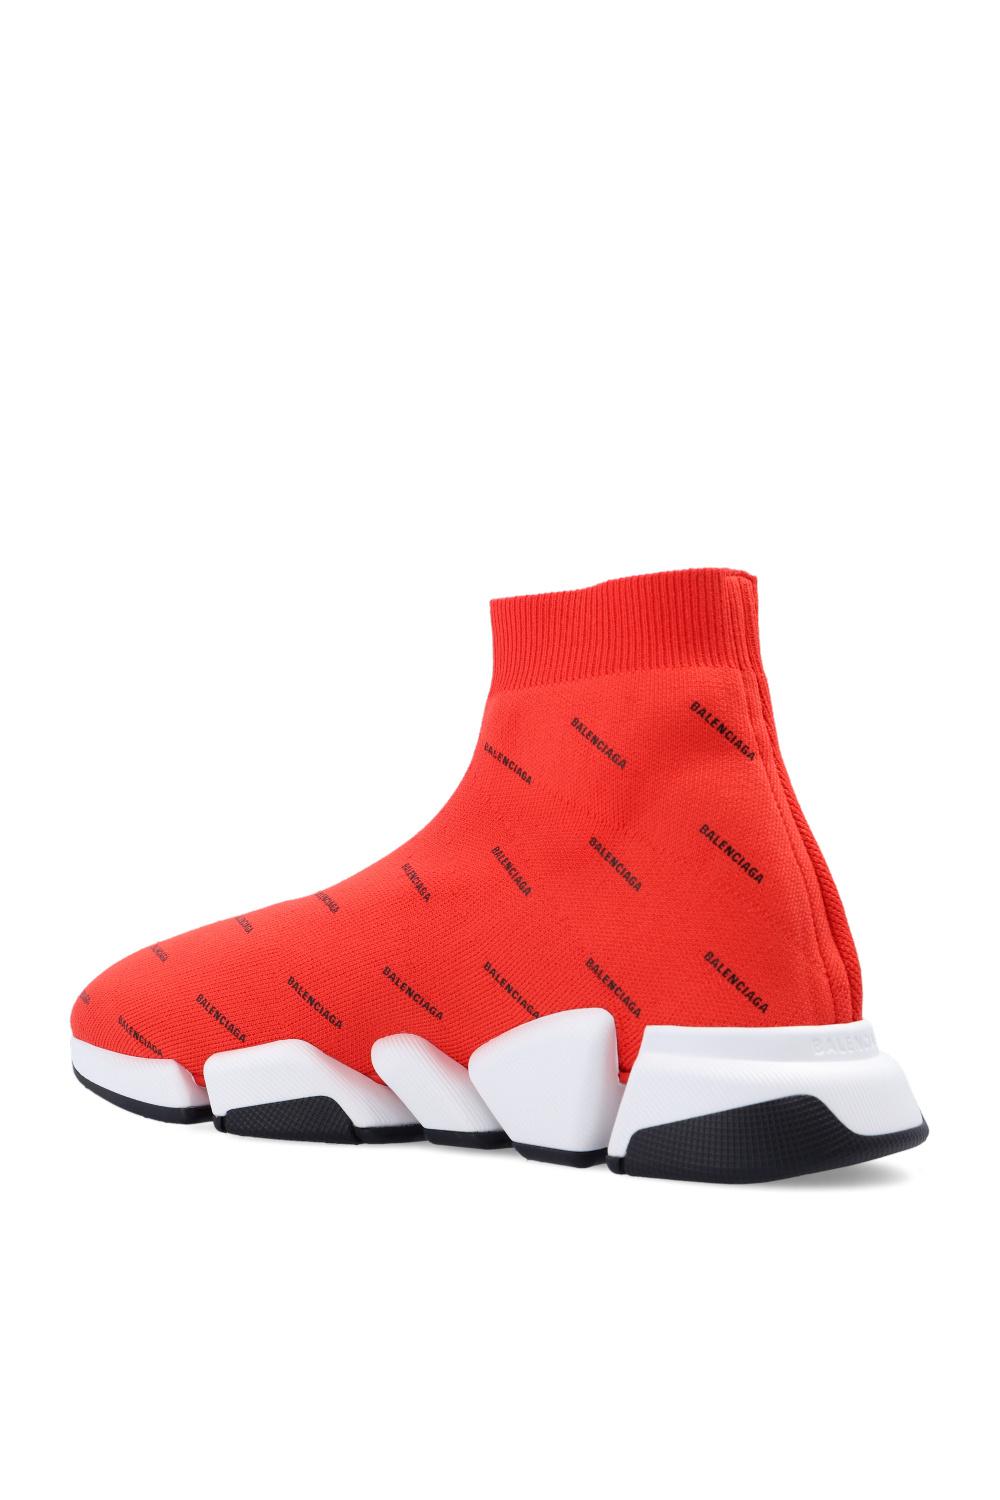 Balenciaga 'speed 2,0' Sock Sneakers in Red for Men | Lyst